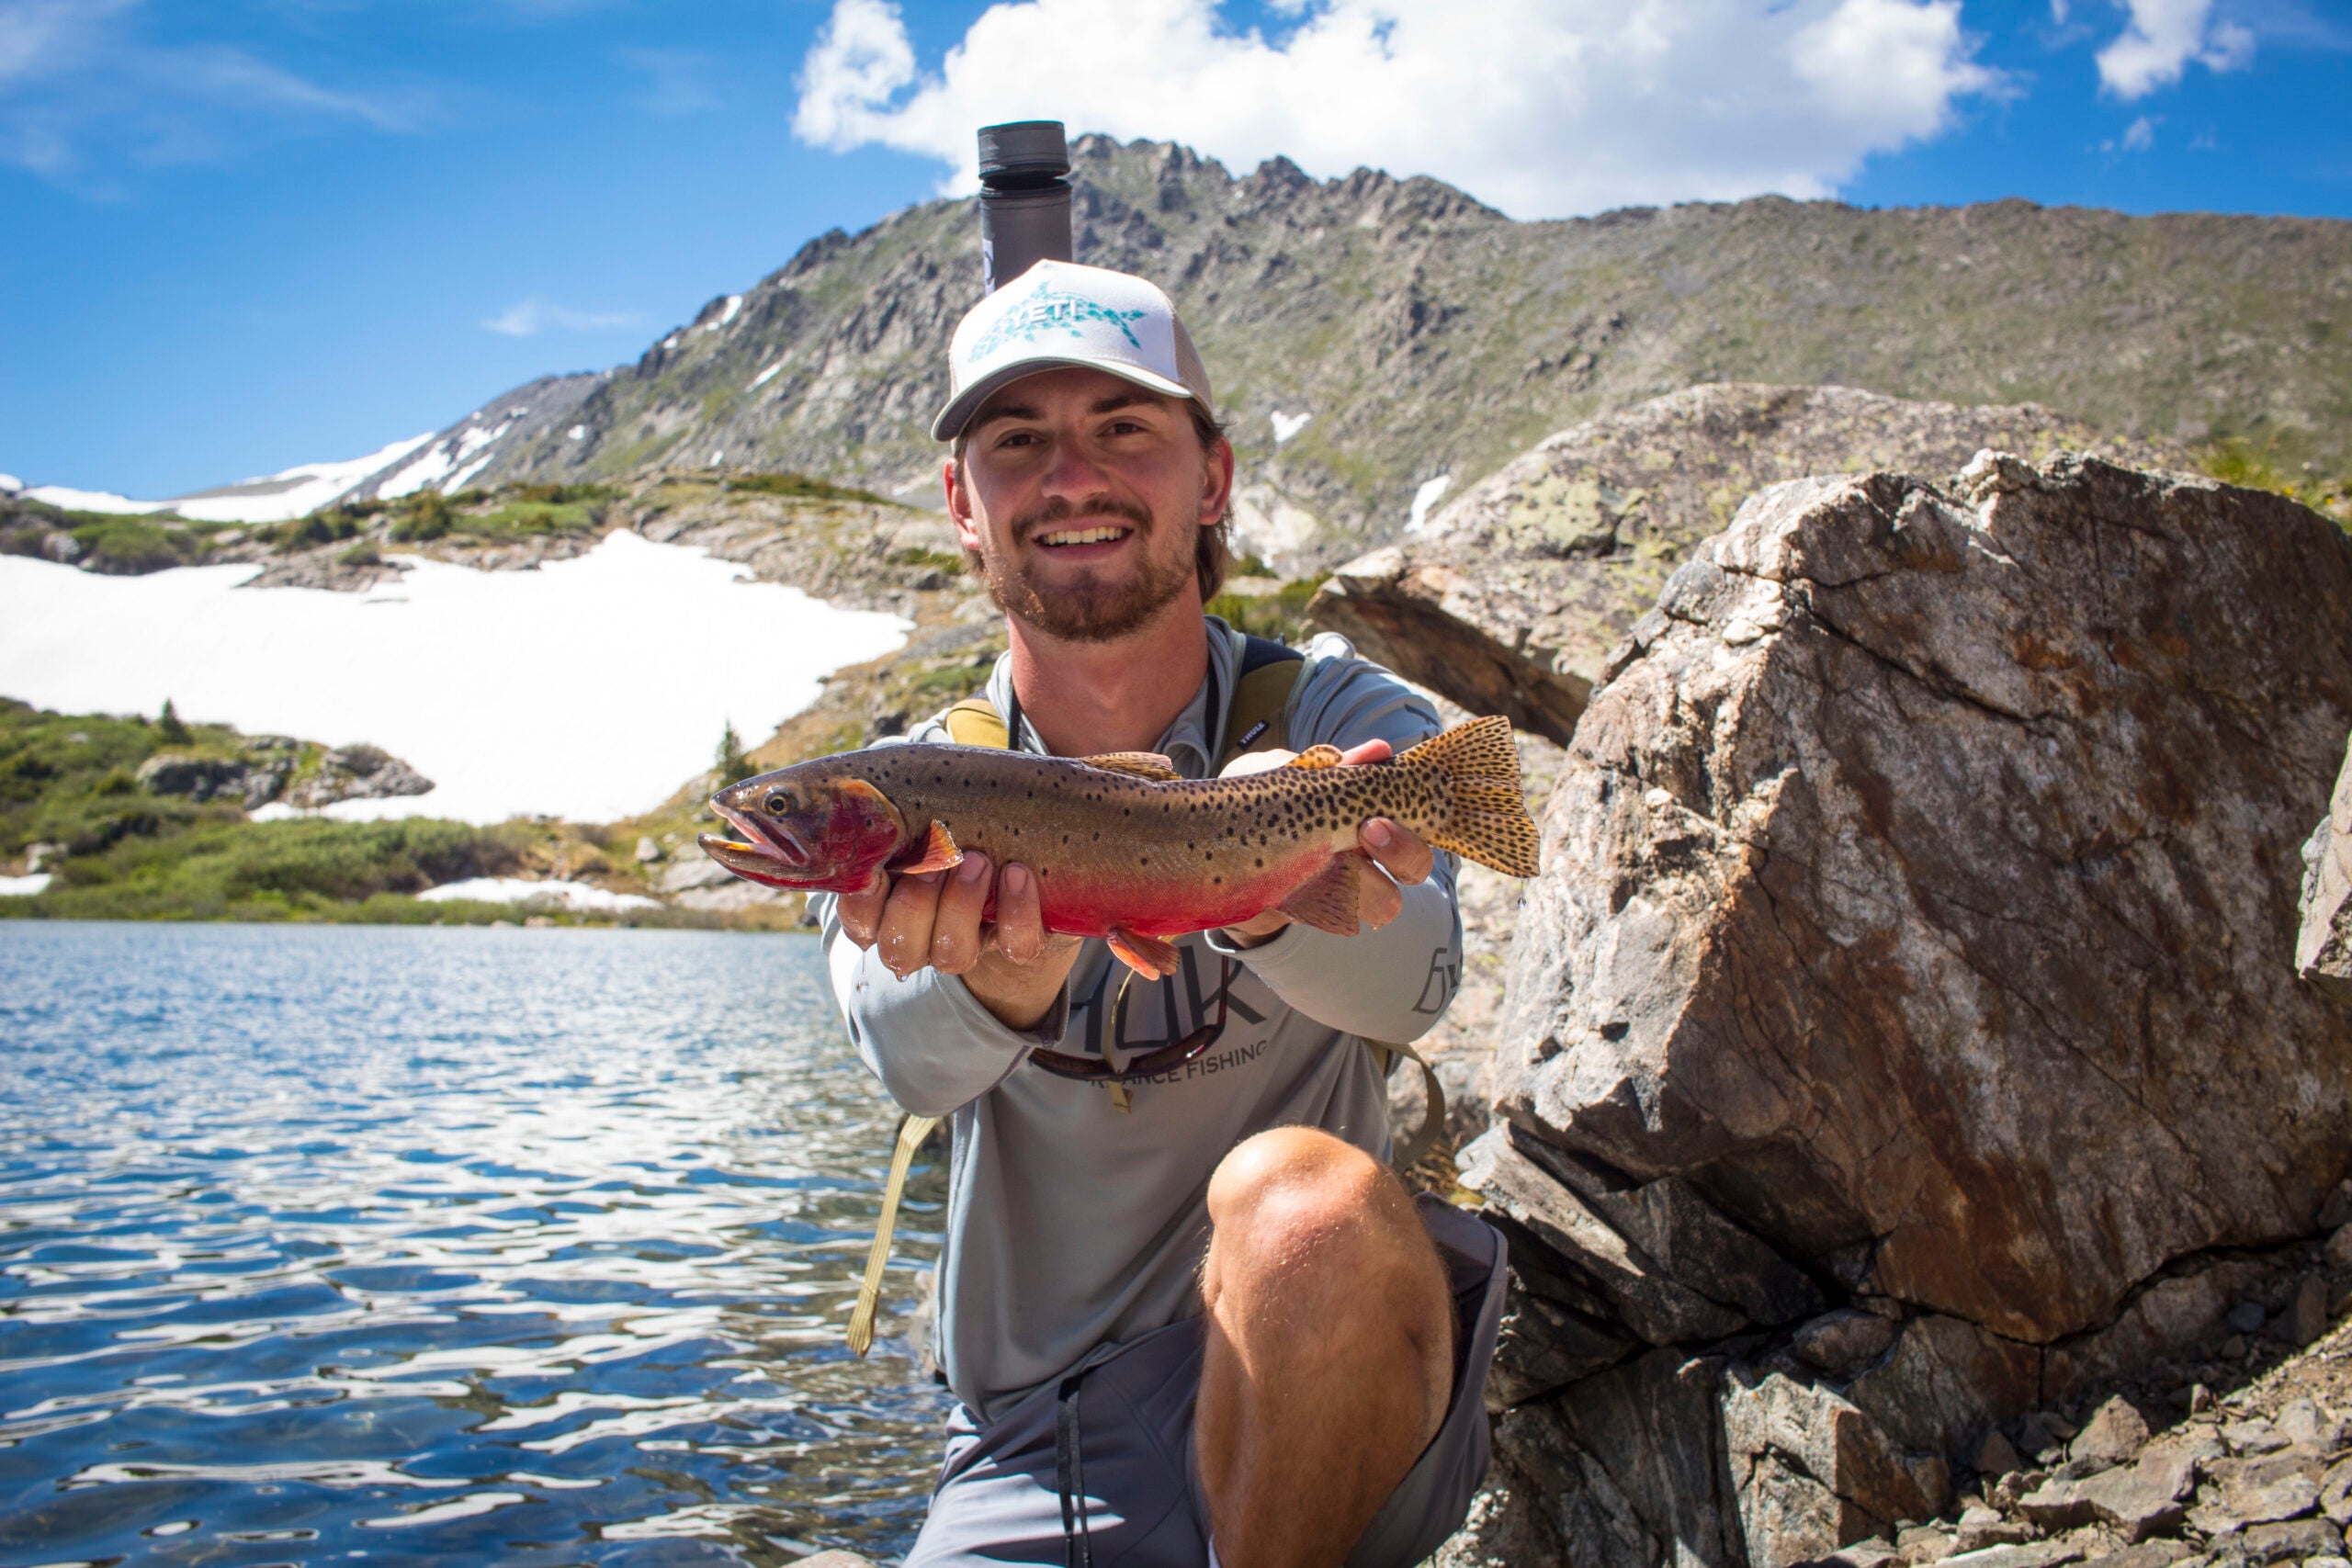 Jeff Browne with a 16-inch Colorado Cutthroat caught on the Orvis Clearwater rod.